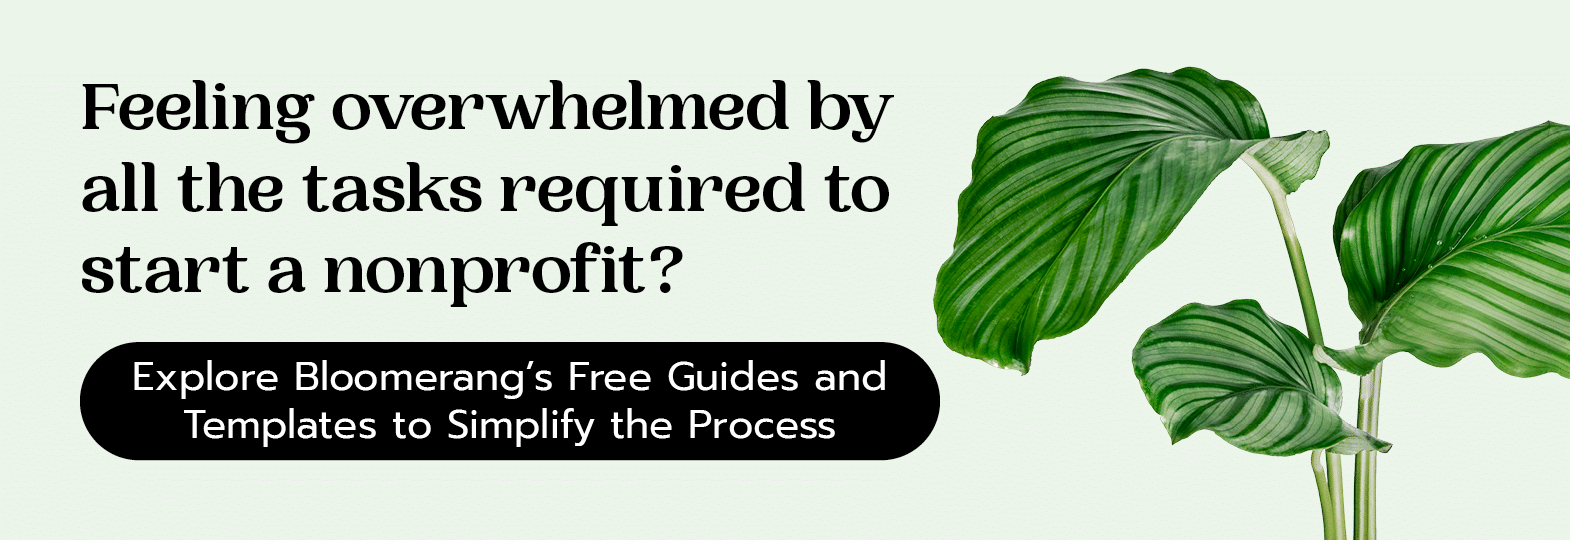 Click here to explore Bloomerang’s Free Guides and Templates to simplify the nonprofit startup process. 